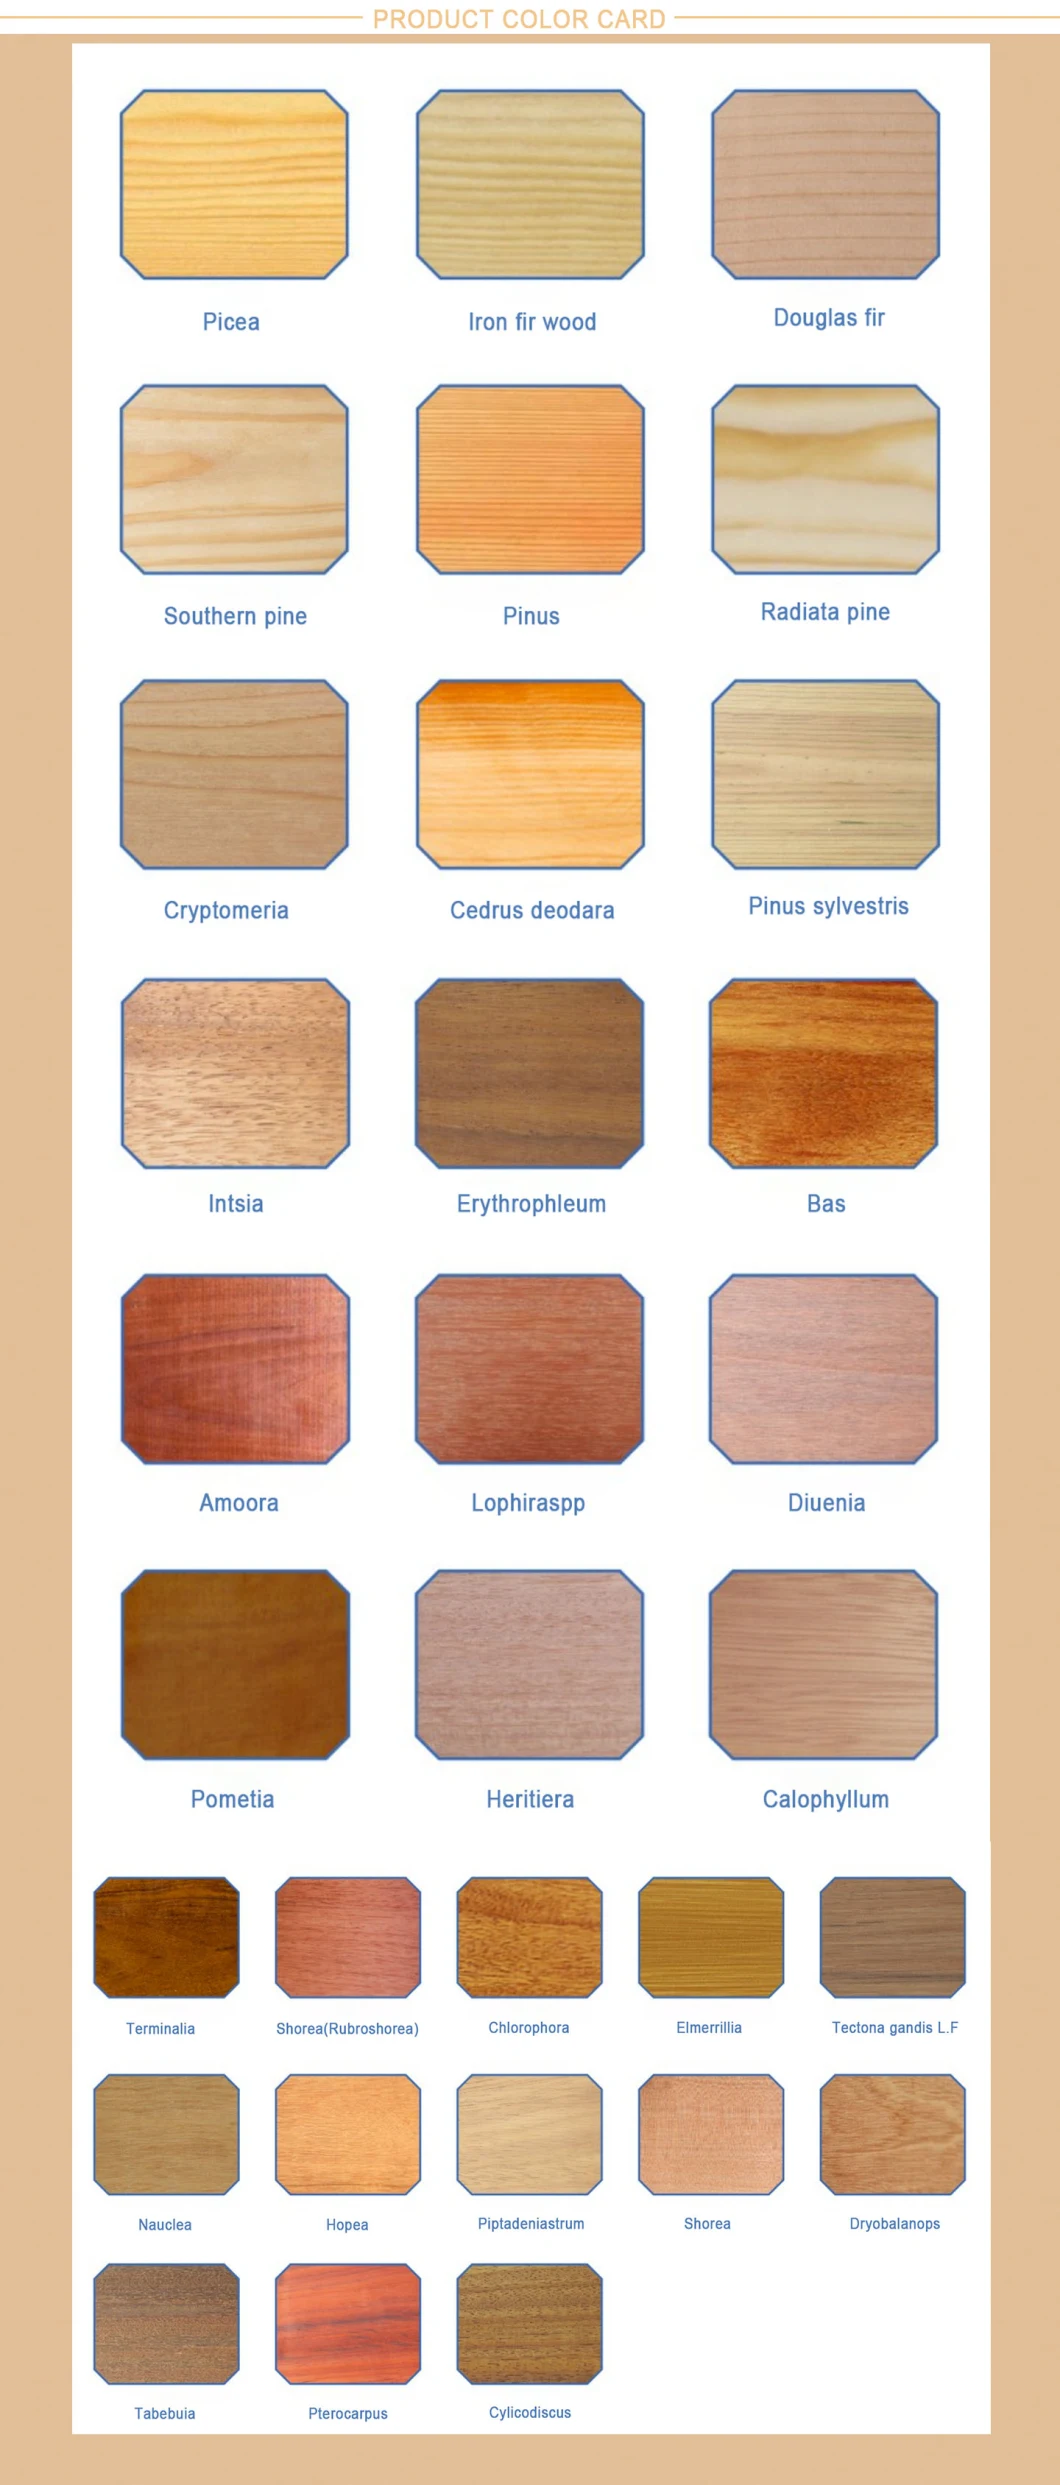 Anticorrosive Solid Wood for Outdoor Platforms, Roads, Gardens Villas Gardens Hotels Swimming Pools